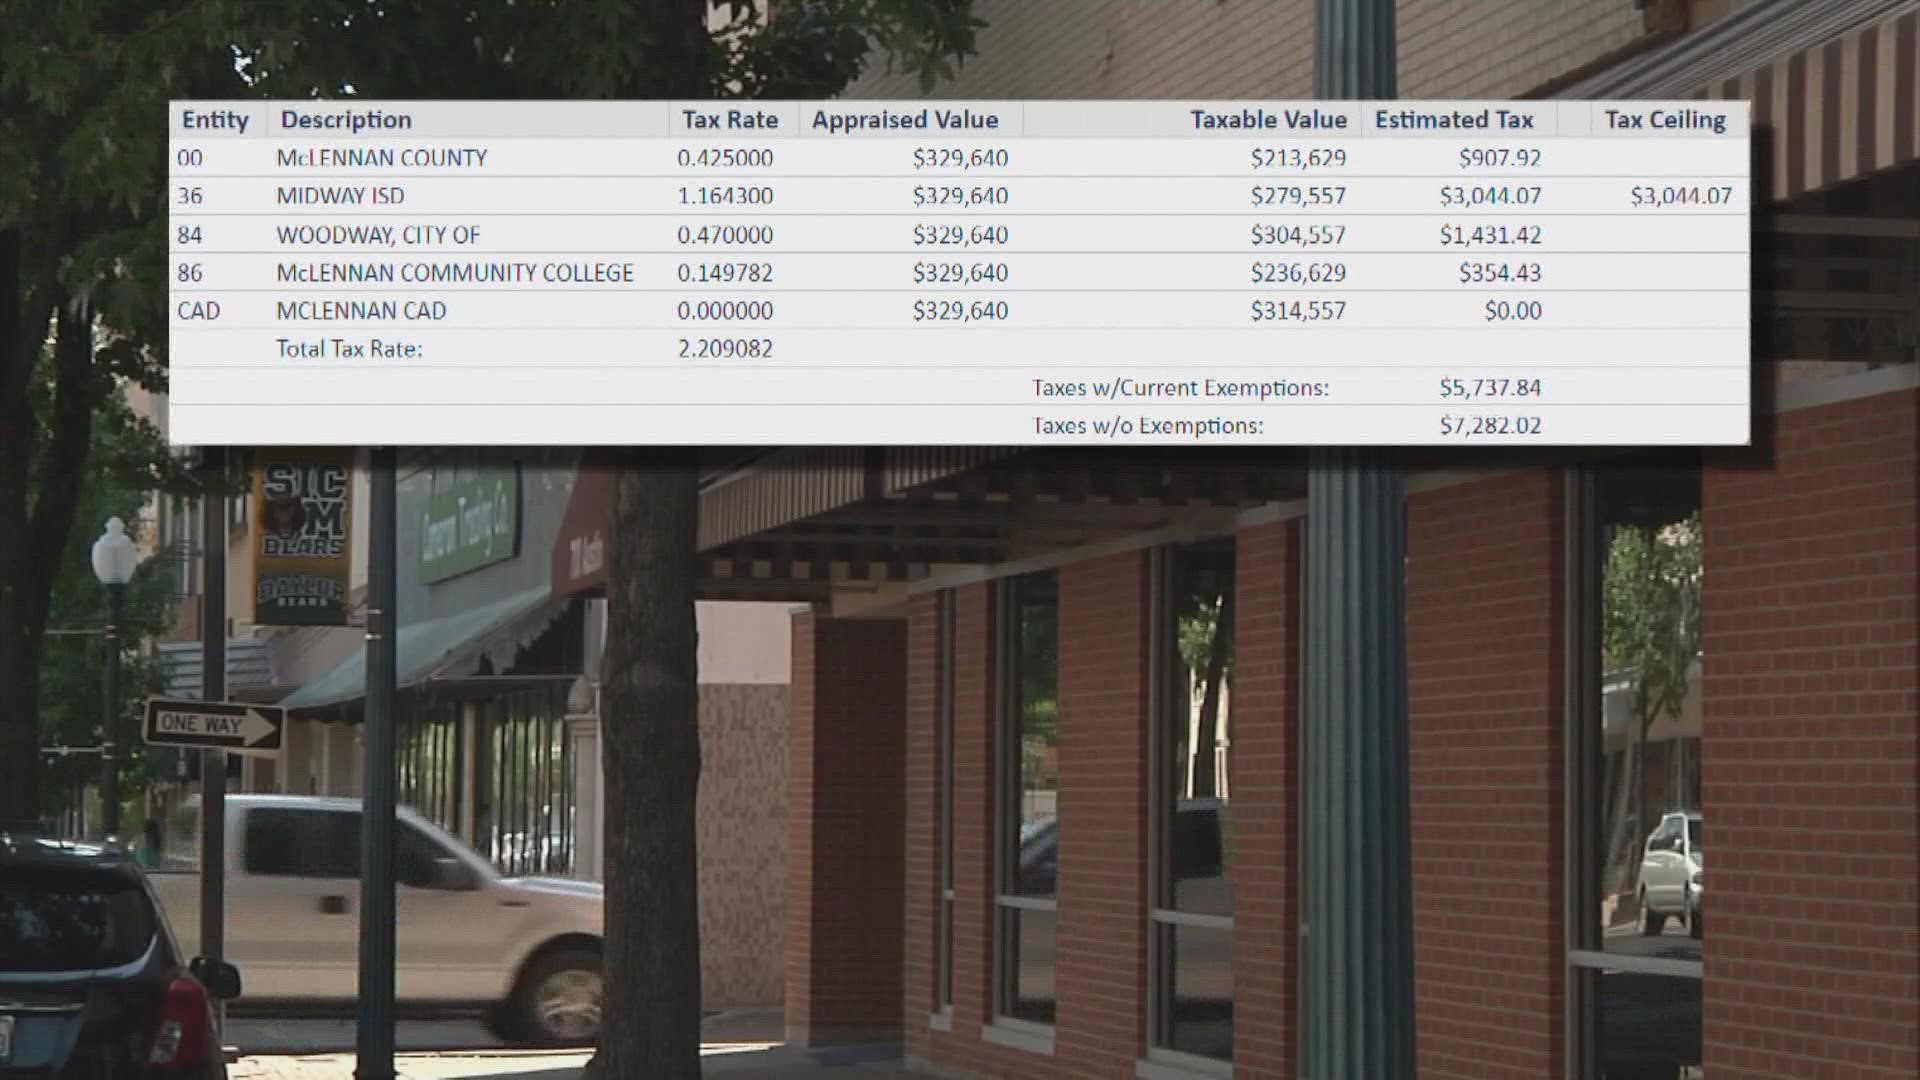 Both the City of Killeen and McLennan County are moving towards lower property tax rates after a spike in property values.